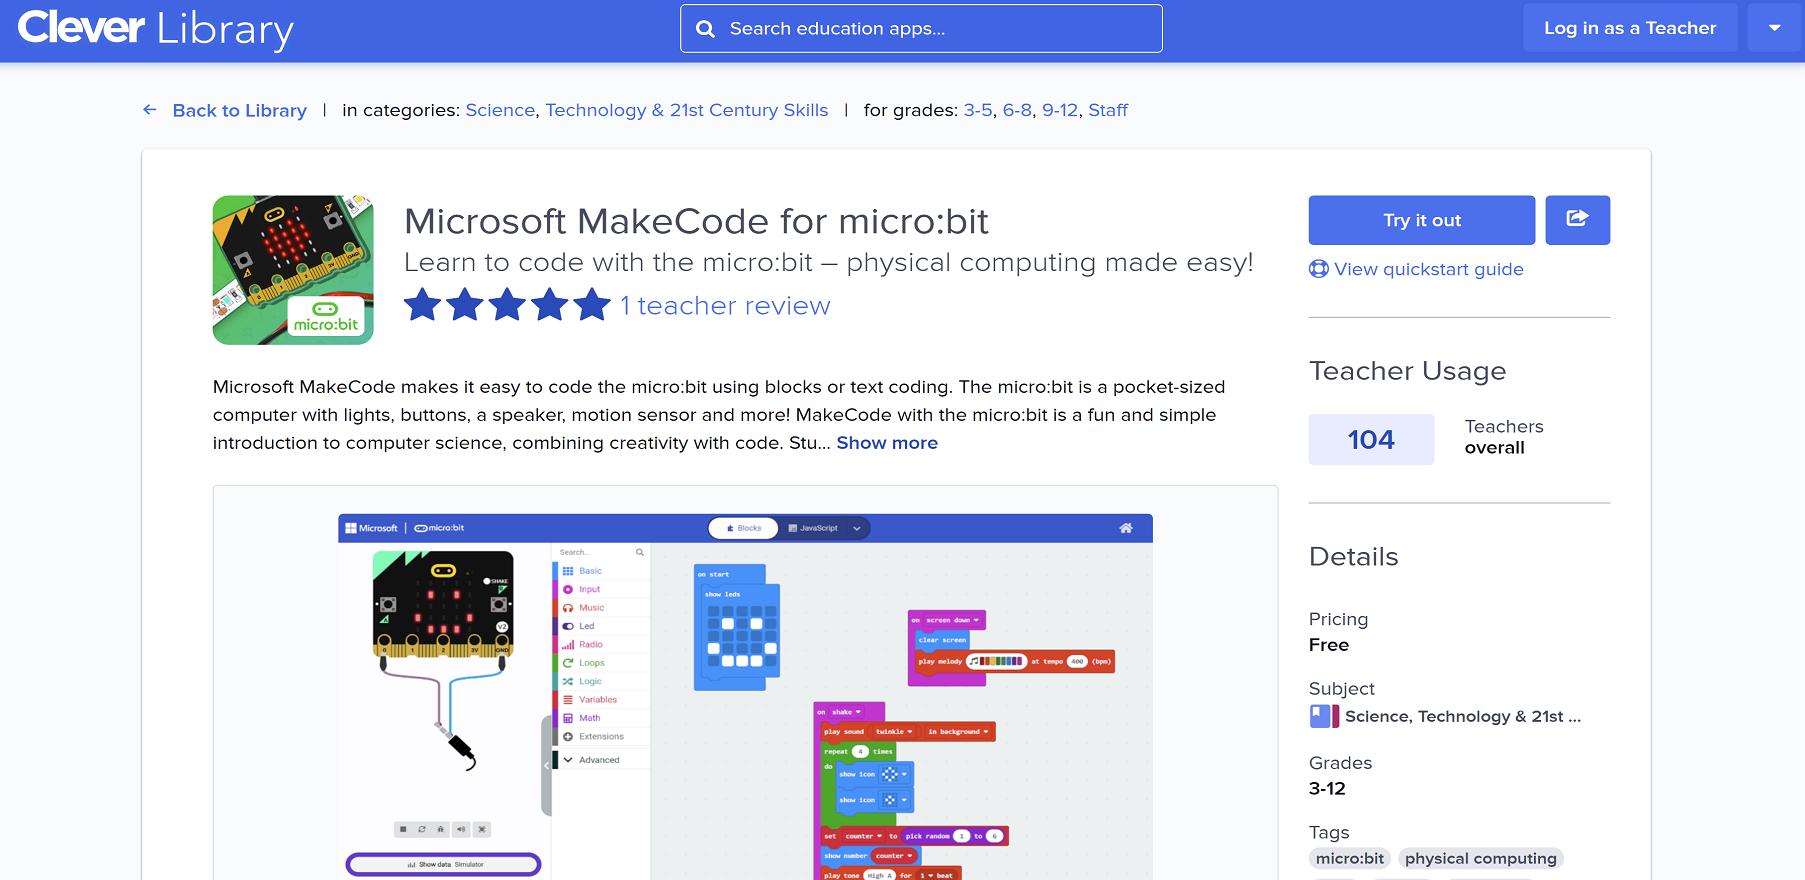 Microsoft MakeCode for micro:bit in the Clever Library